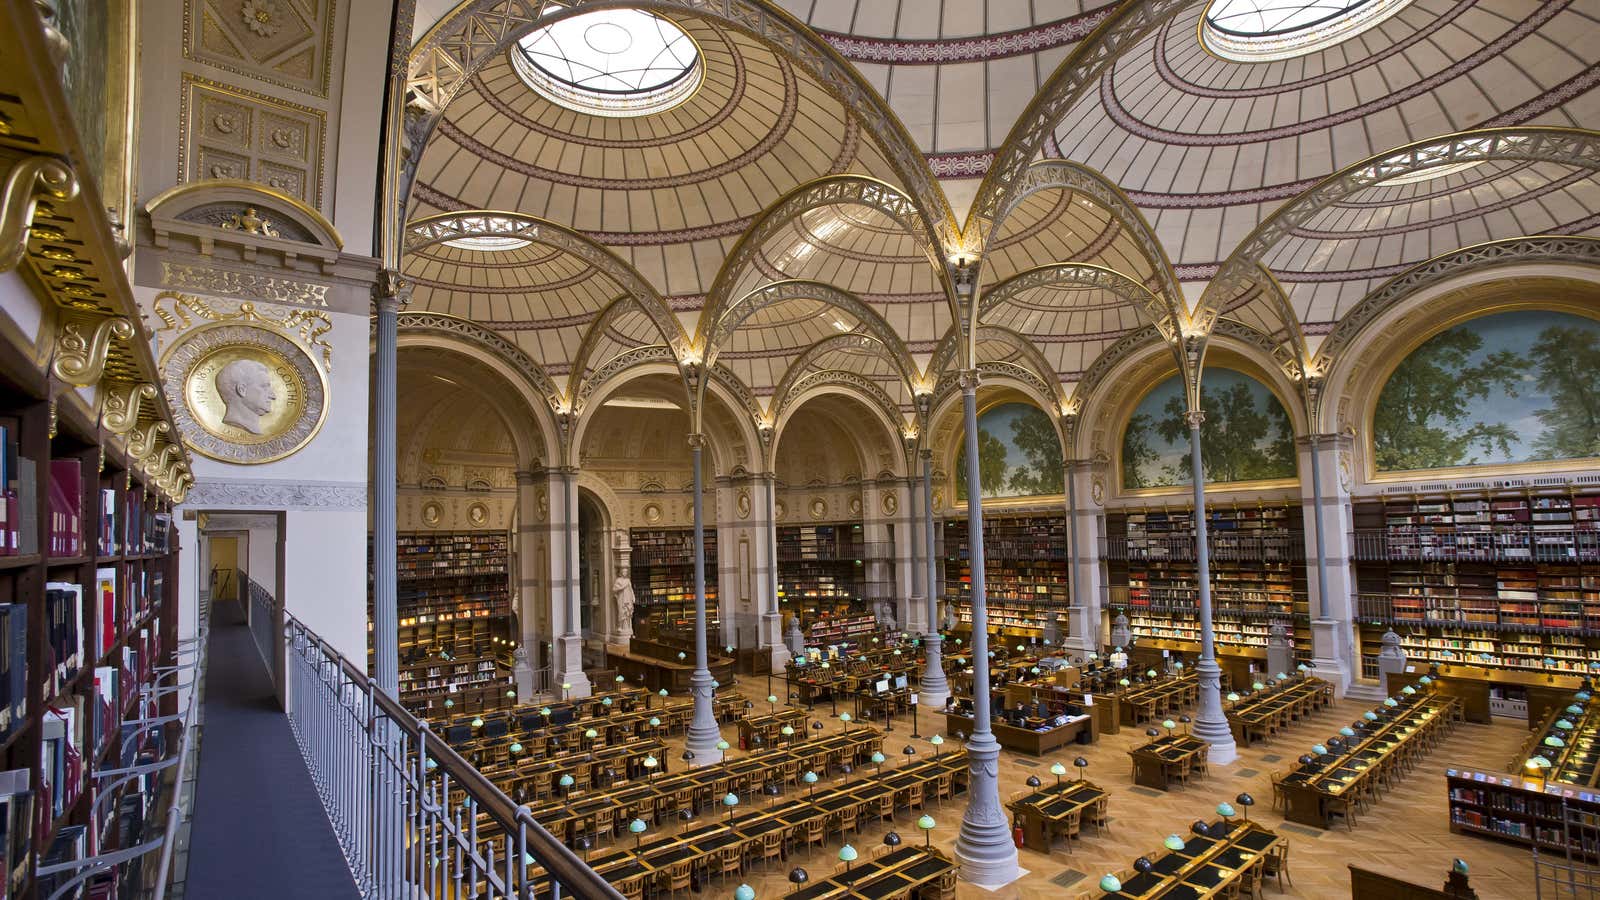 The Richelieu-Louvois Library in Paris, part of the National Library of France.